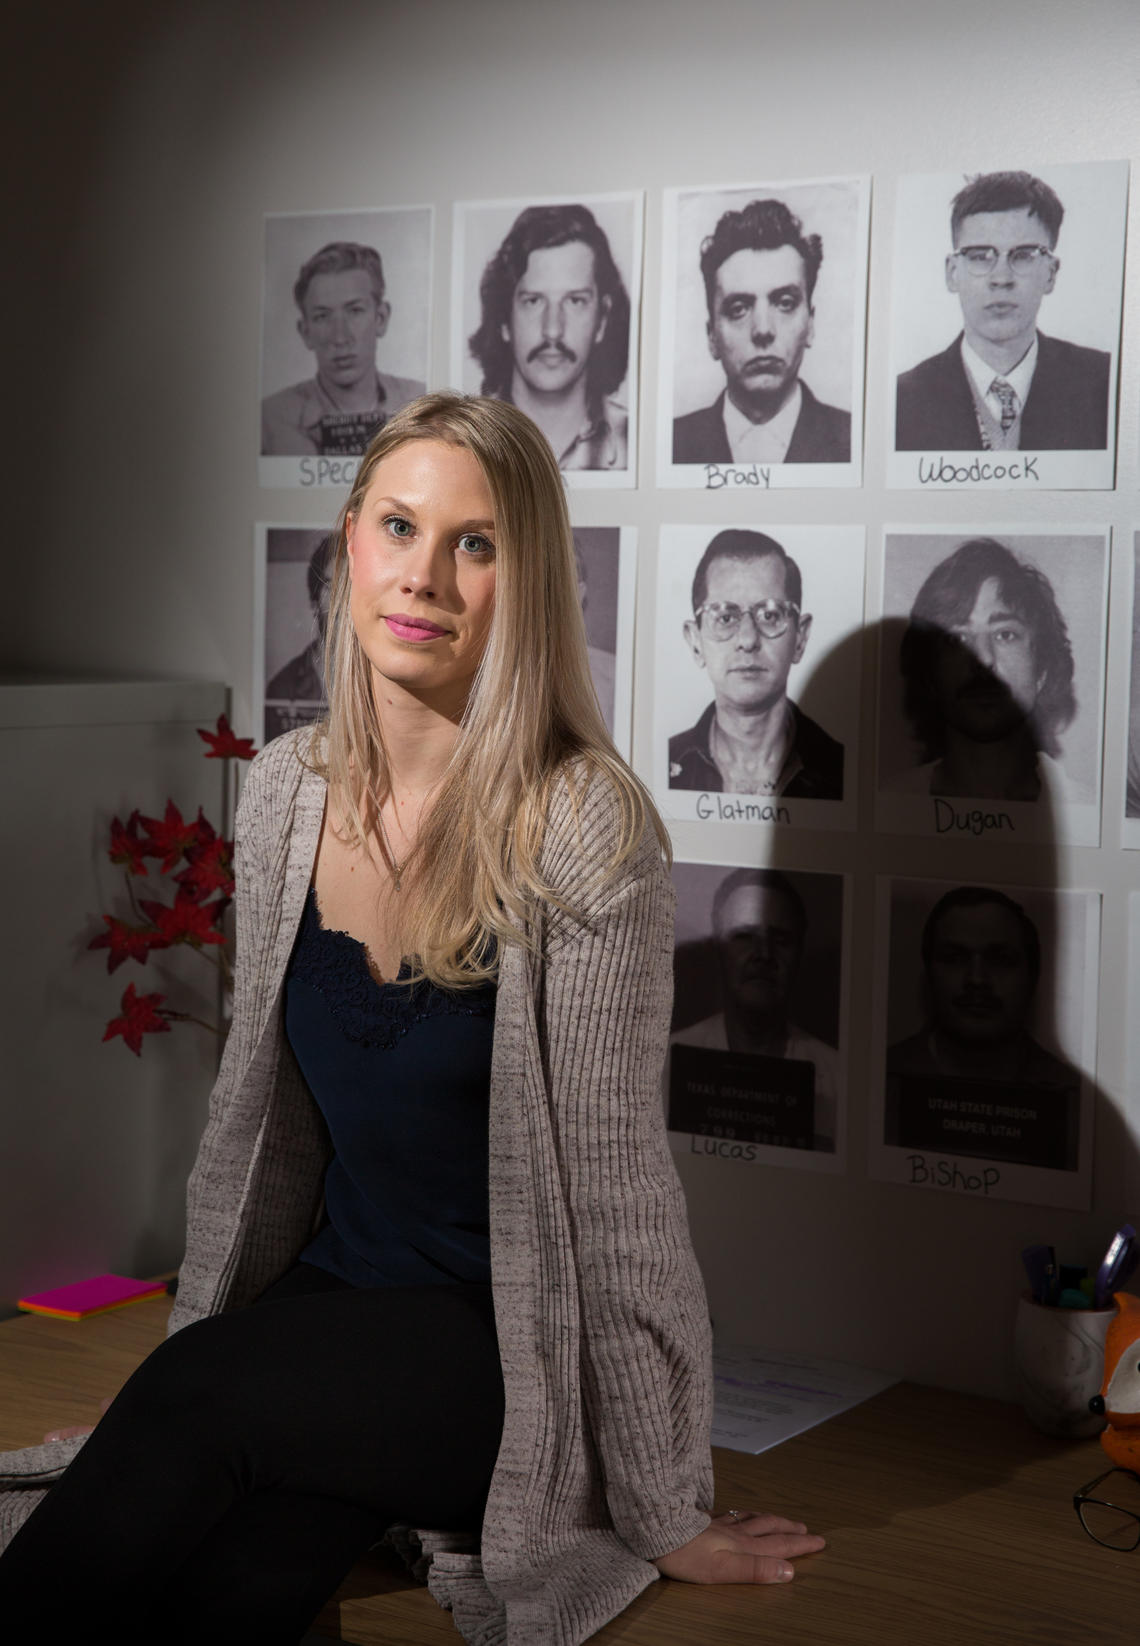 Sasha Reid, an instructor in the departments of sociology and psychology at the University of Calgary, has compiled what may become the most comprehensive serial killer database in the world.